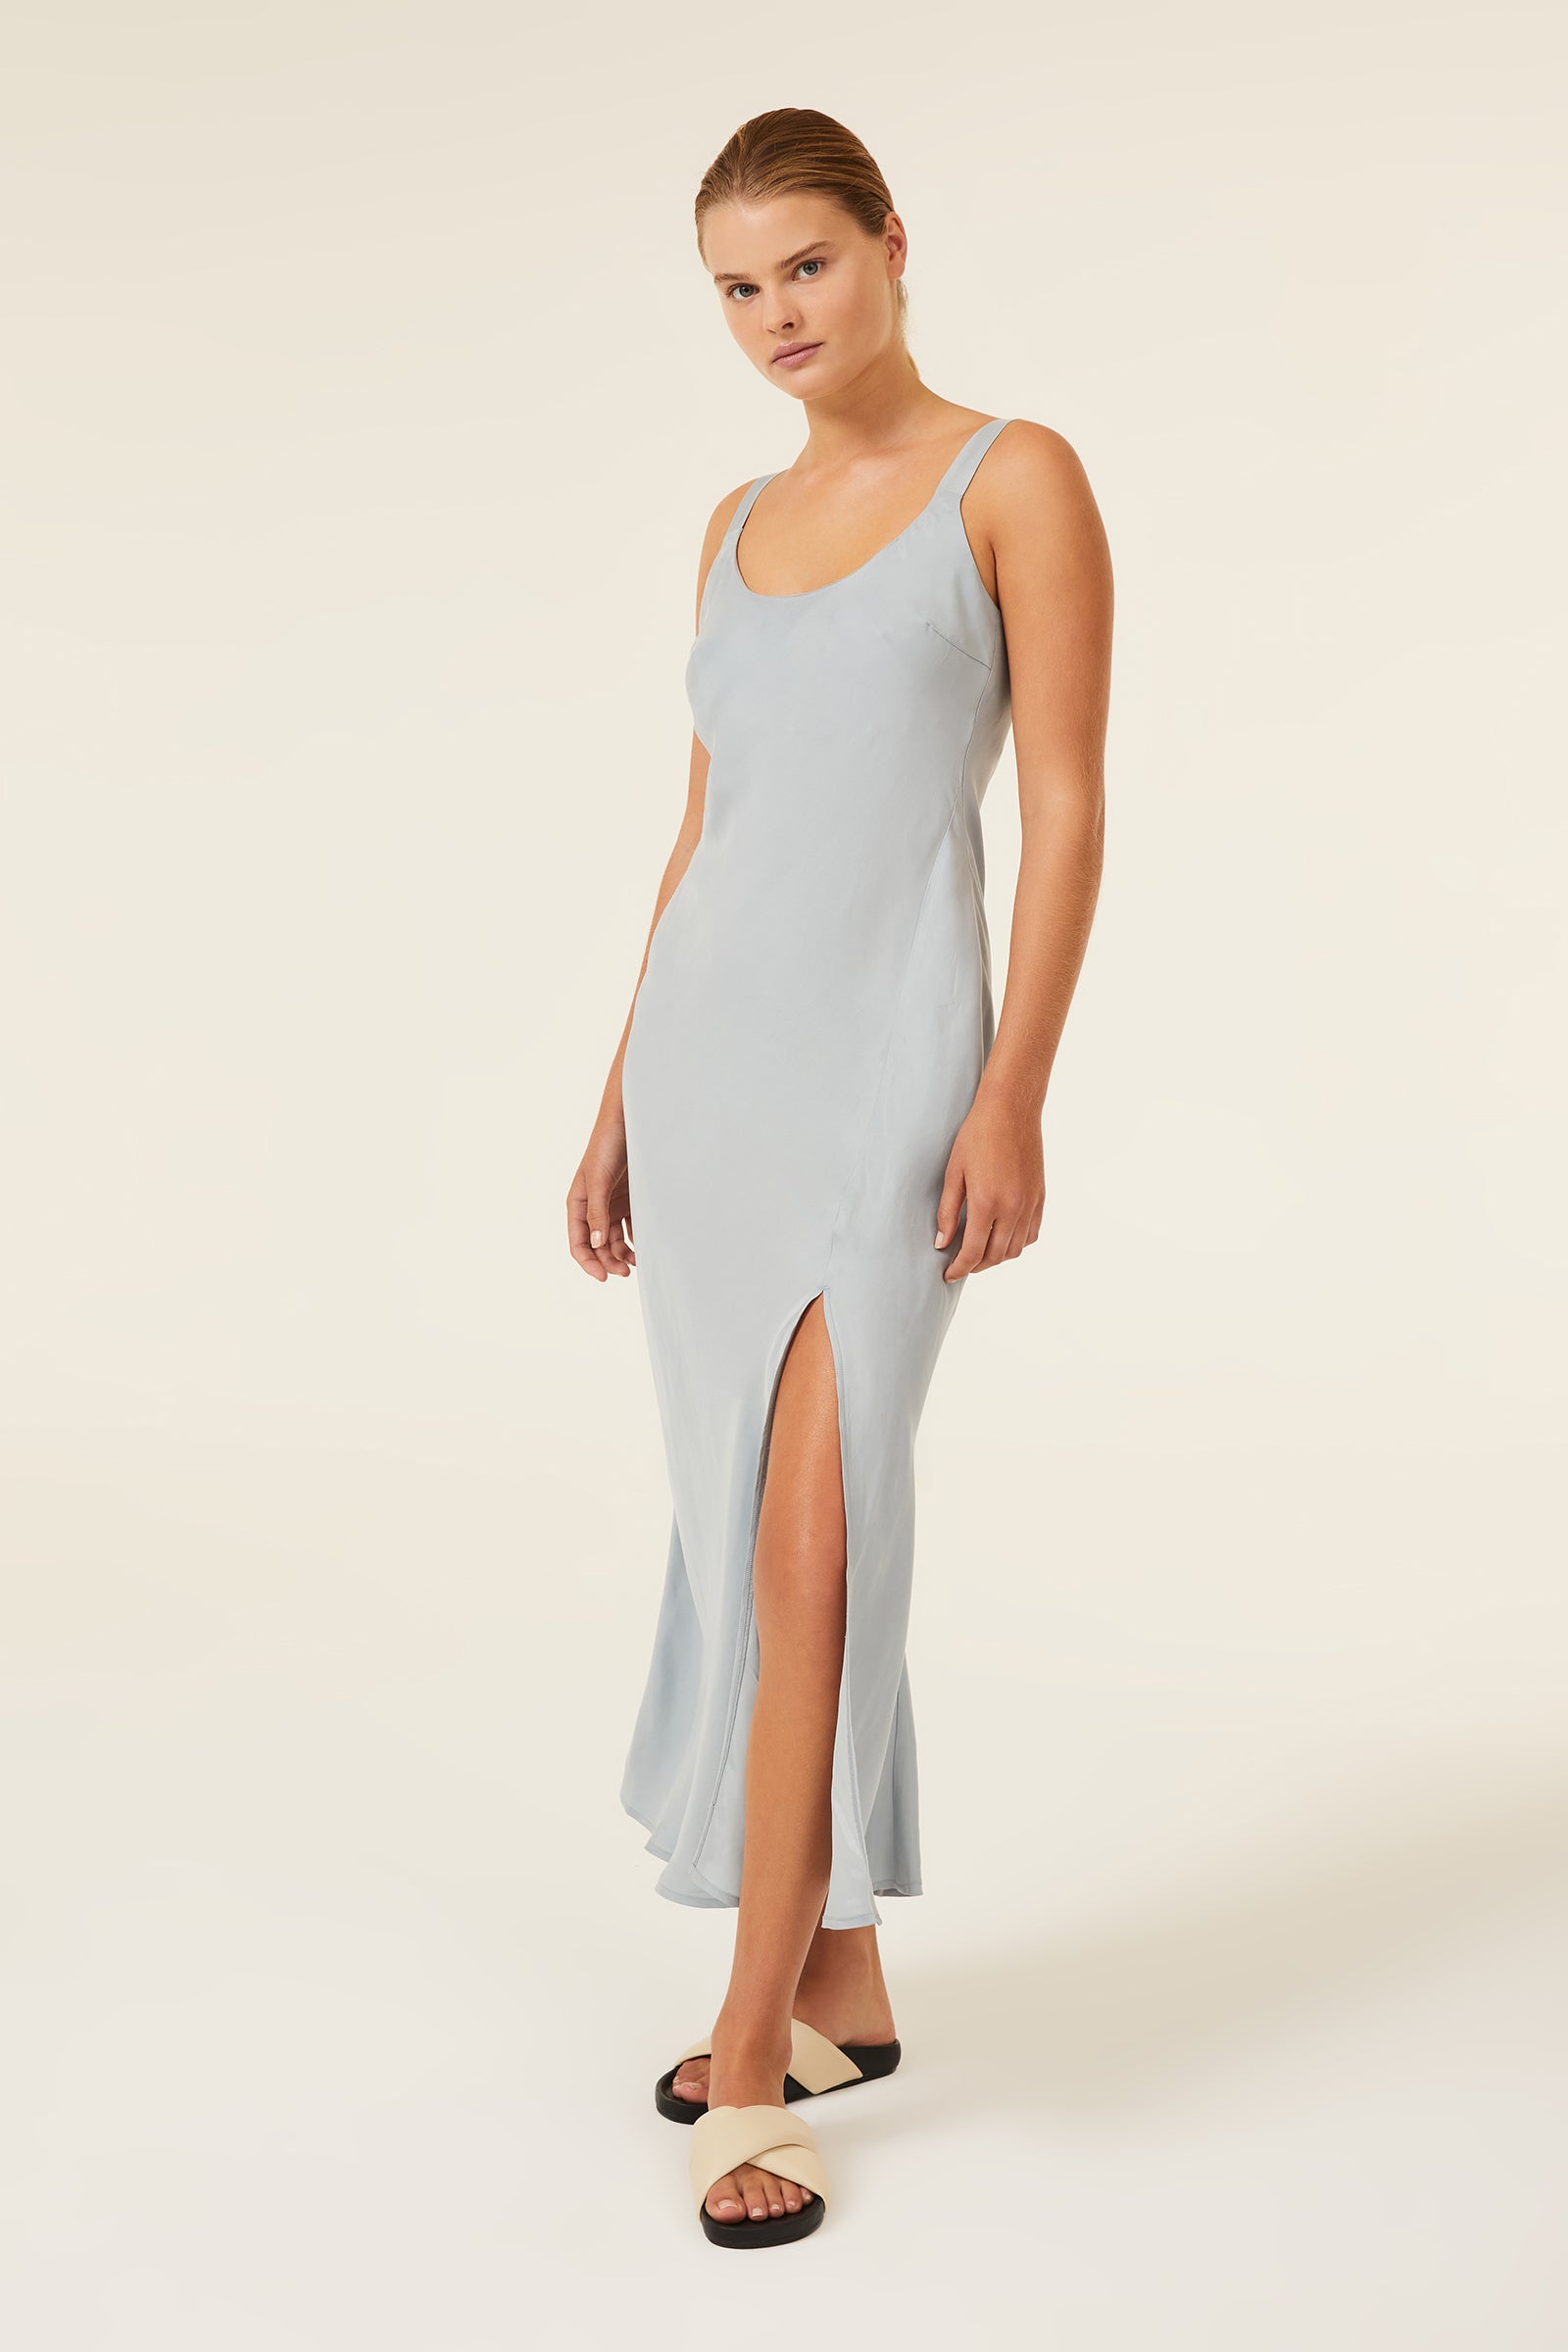 Nude Lucy Harlow Cupro Slip Dress In a Green & Blue Toned Marine Colour